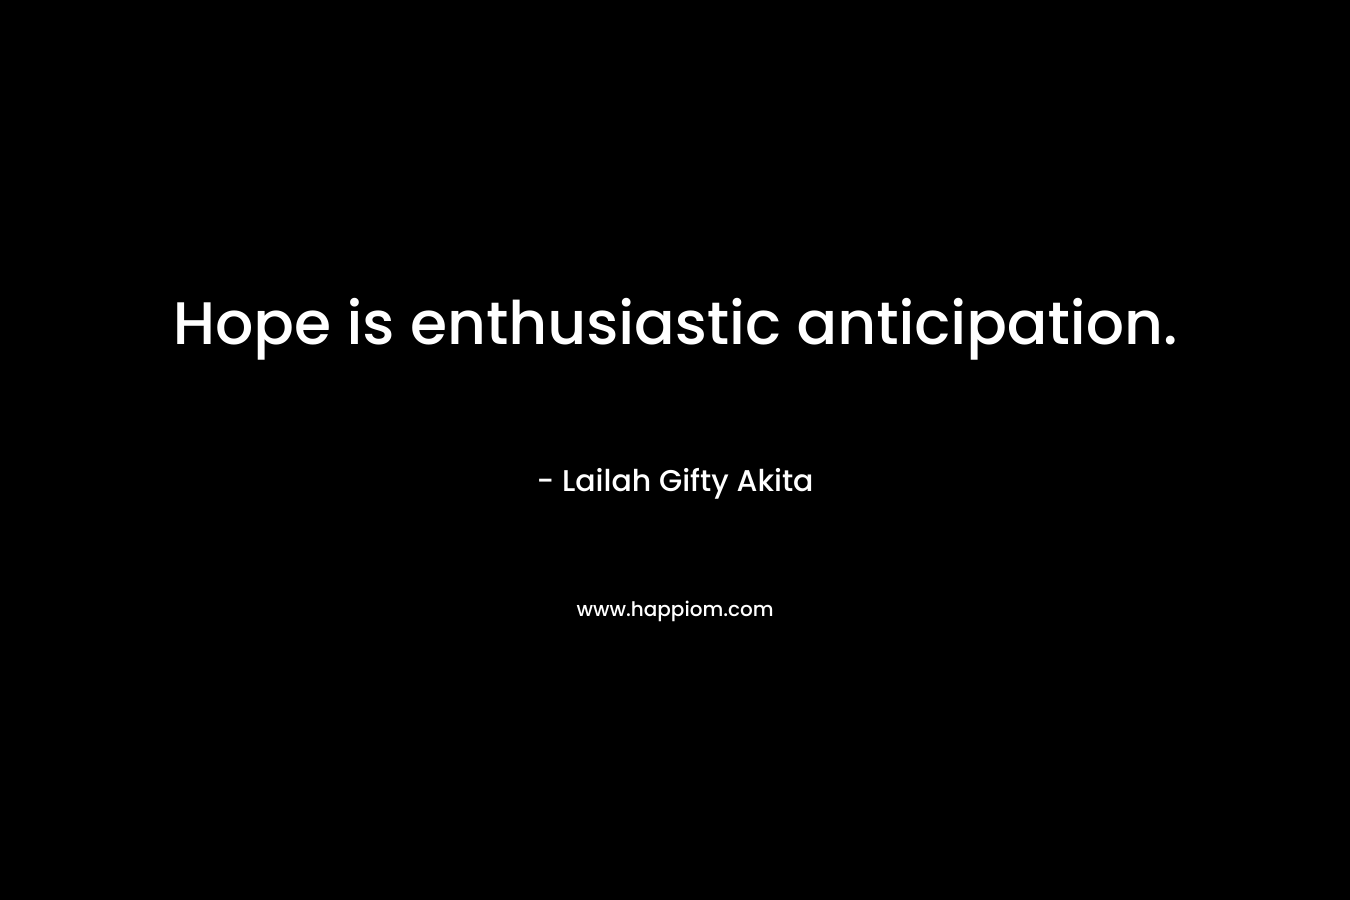 Hope is enthusiastic anticipation.